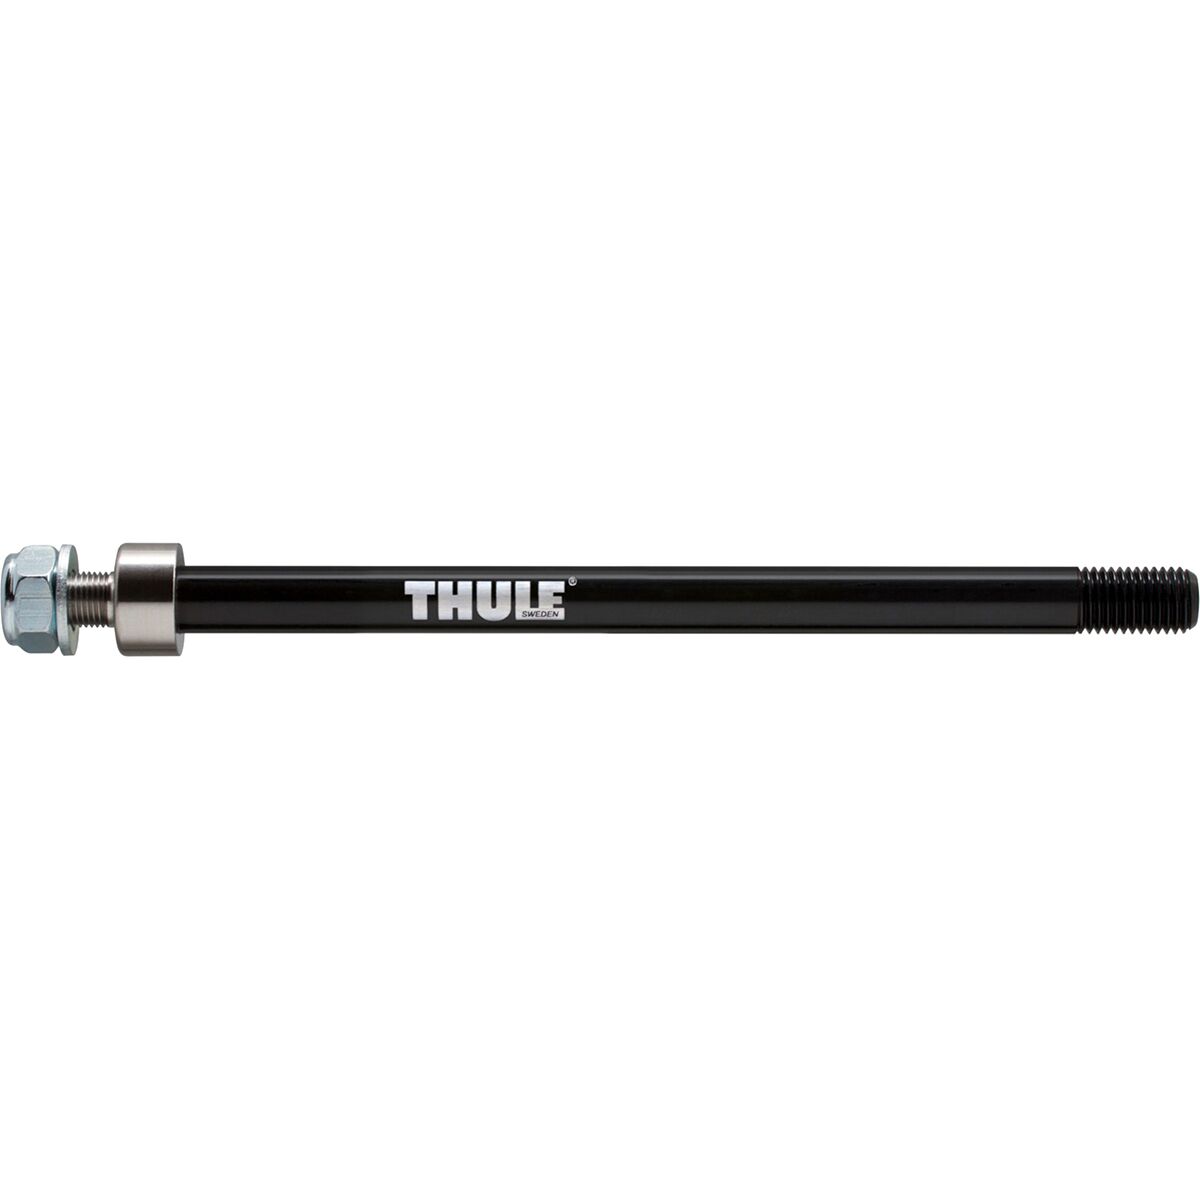 Thule Chariot 12mm Axle Adapter